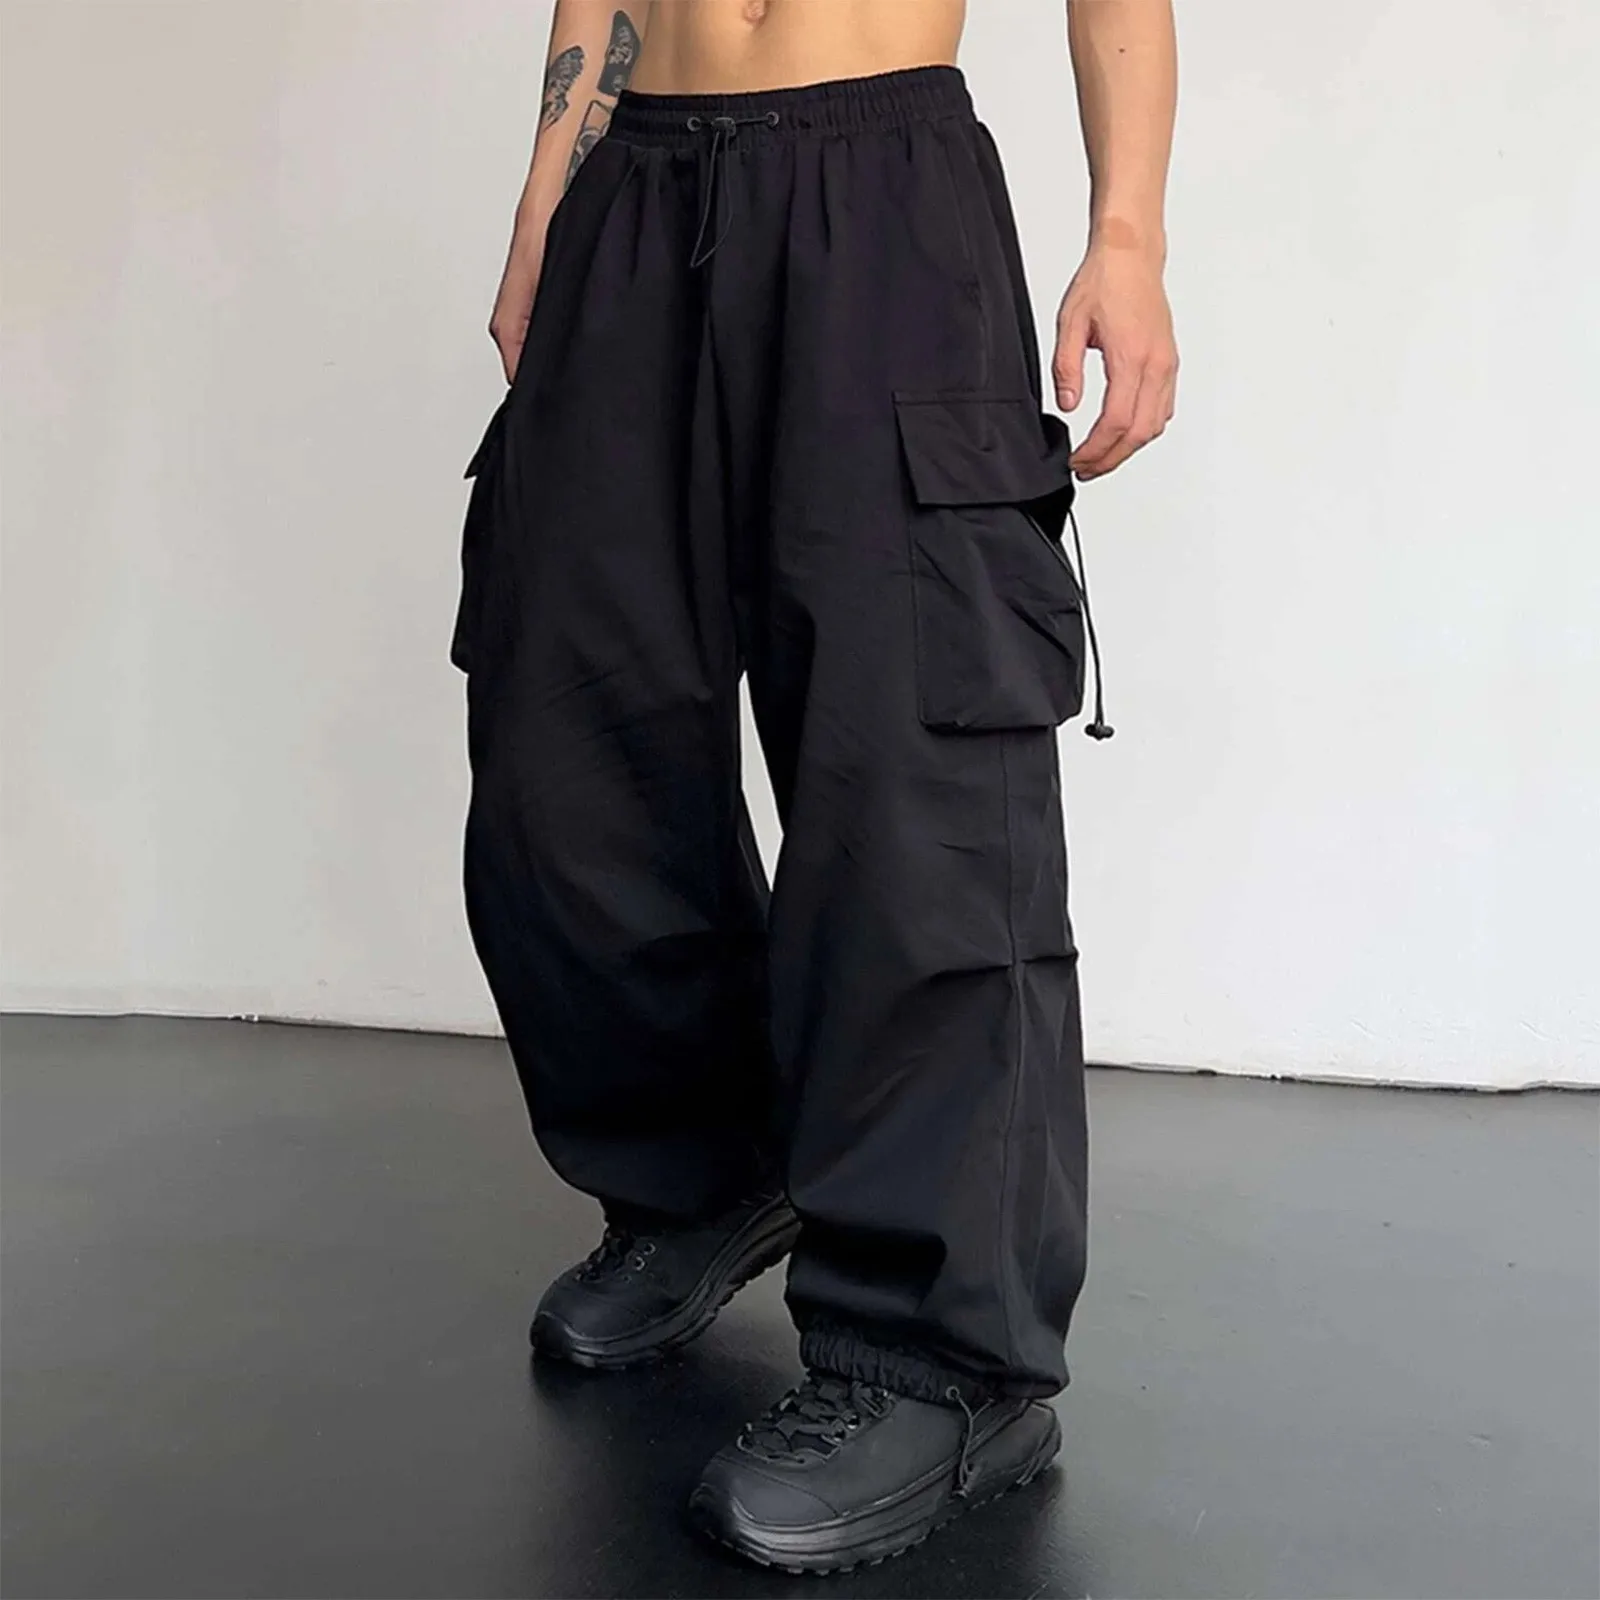 

Men's Multi-Pockets Cargo Long Pants Solid Color High Waist Baggy Wide Leg Trousers Outdoor Fitness Jogger Casual Workwear Pants